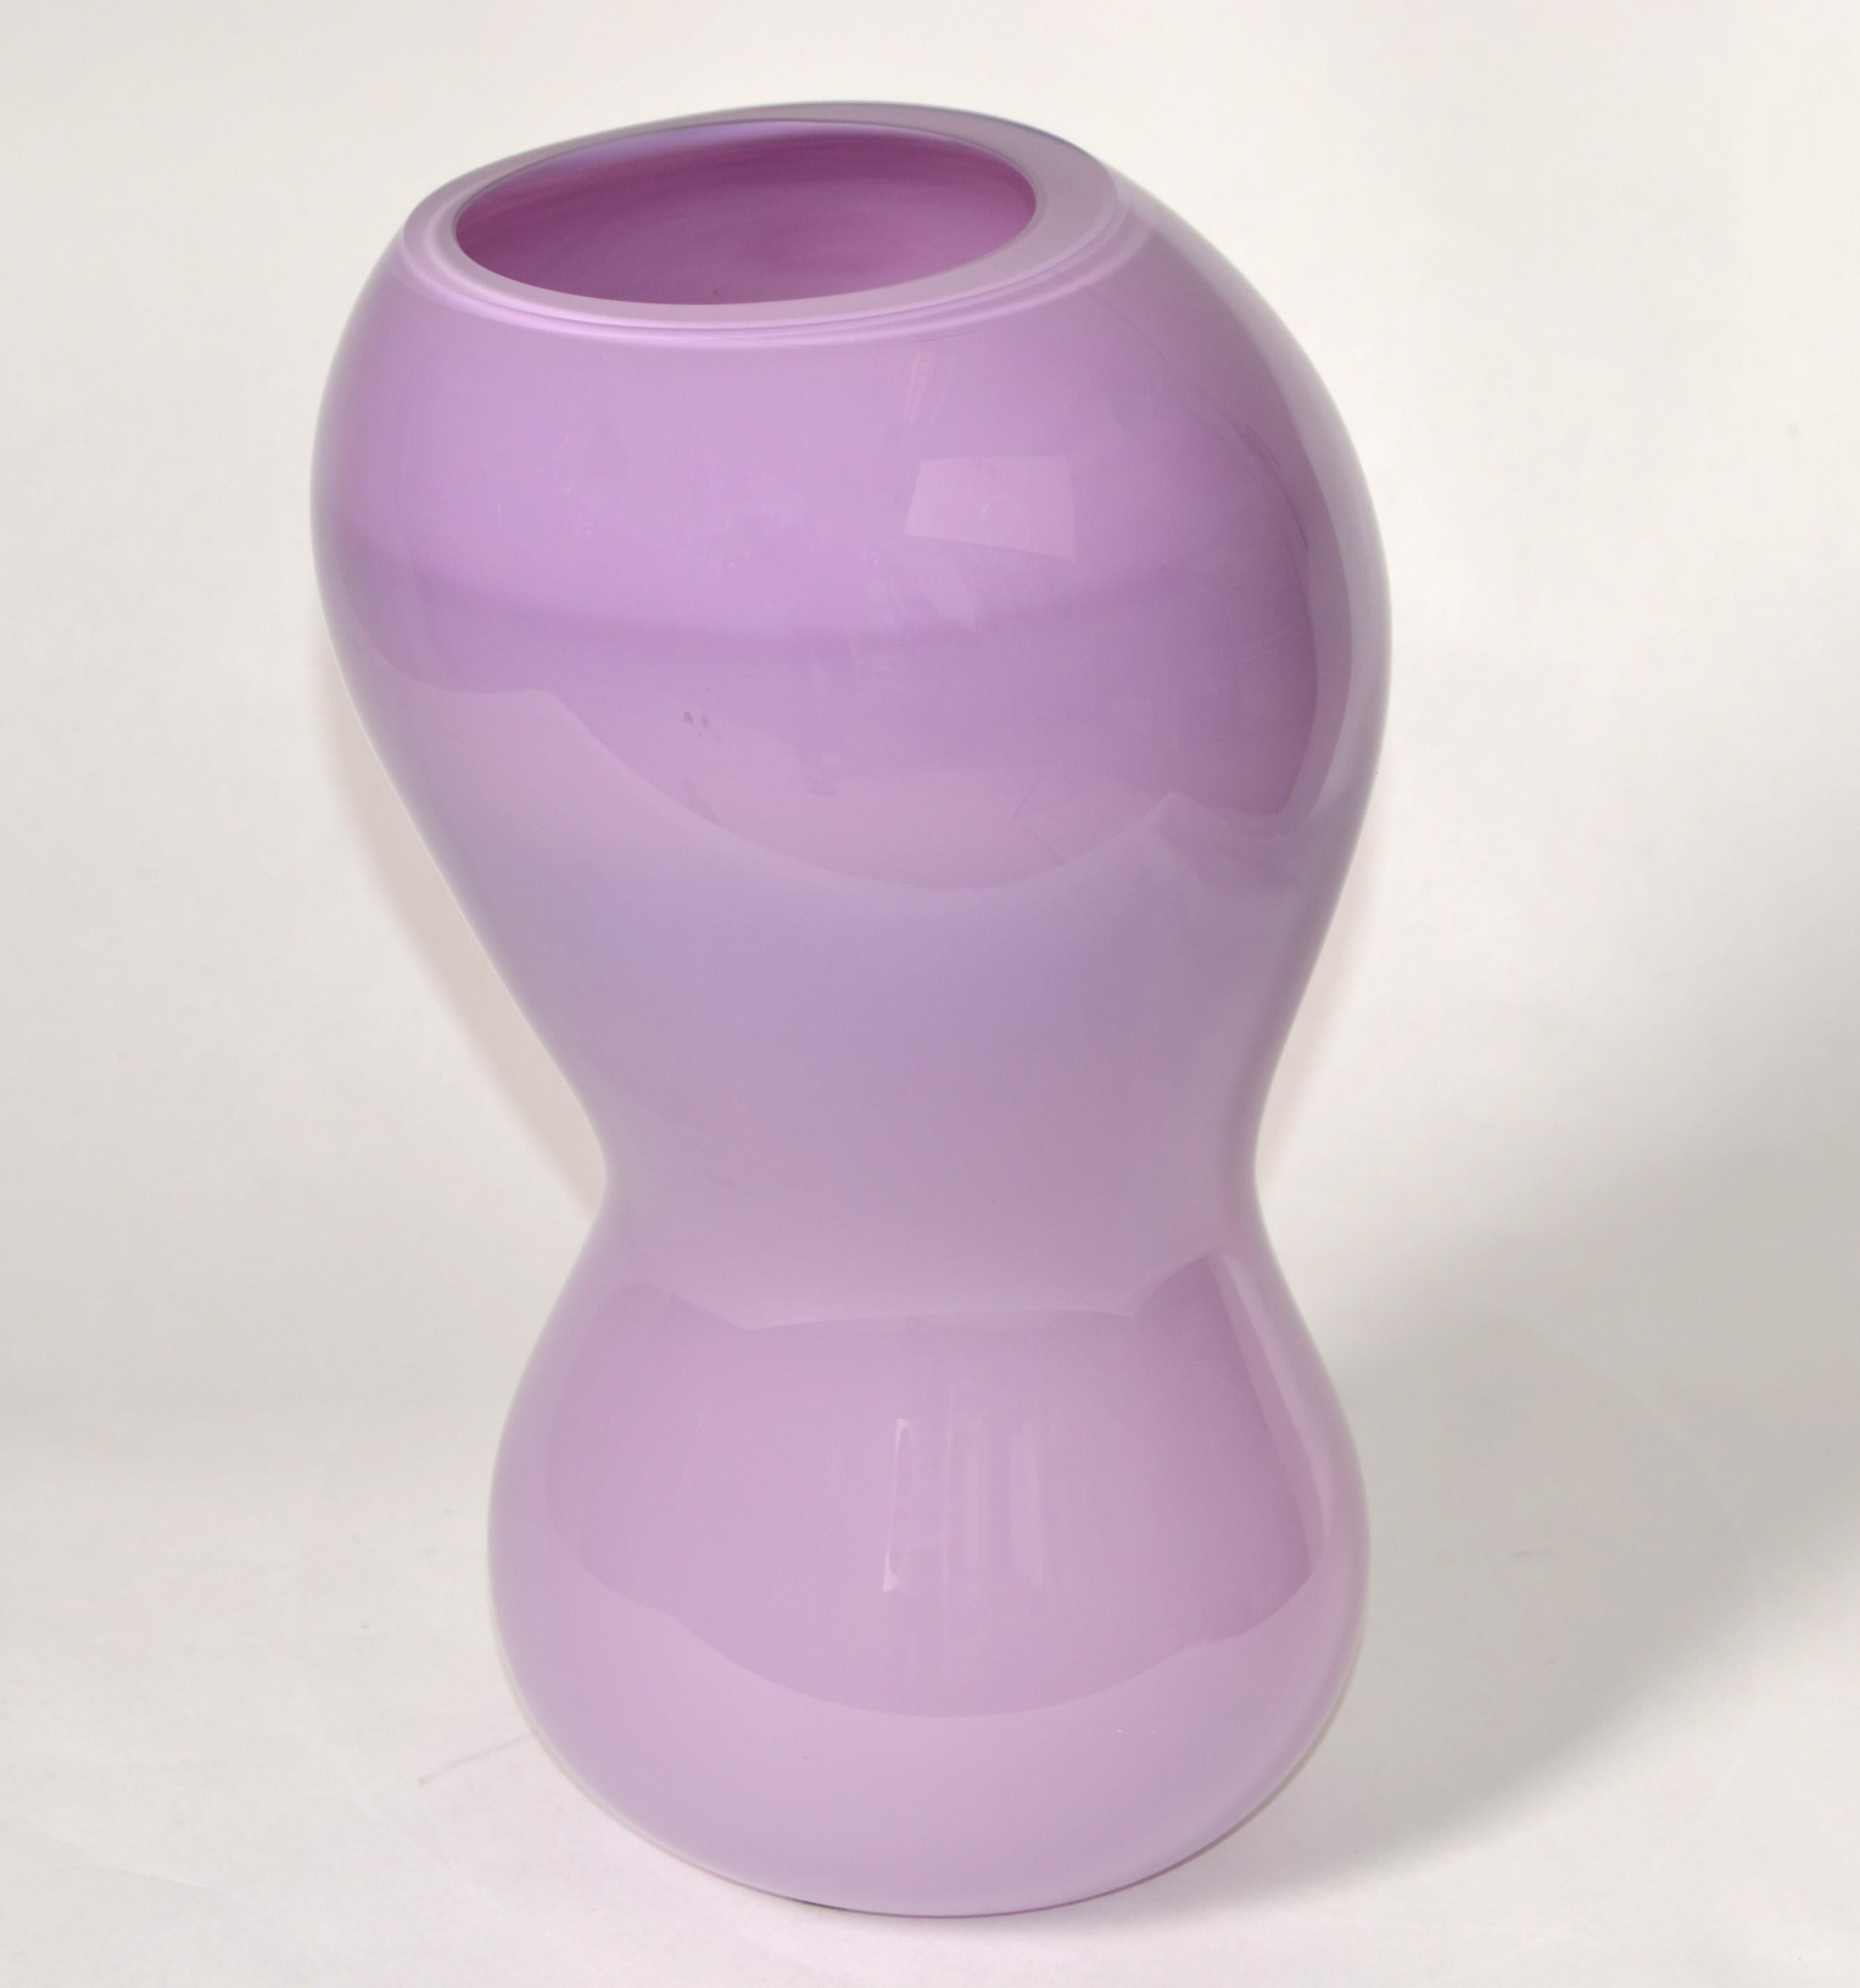 Stunner done Vase designed by Nigel Coates (English, 1949) for Salviati (Italian, founded 1859), circa 1992. A rare organic shaped cased art glass vase in Lavender, light purple with biomorphic body.   
Signed and dated to the underside Nigel